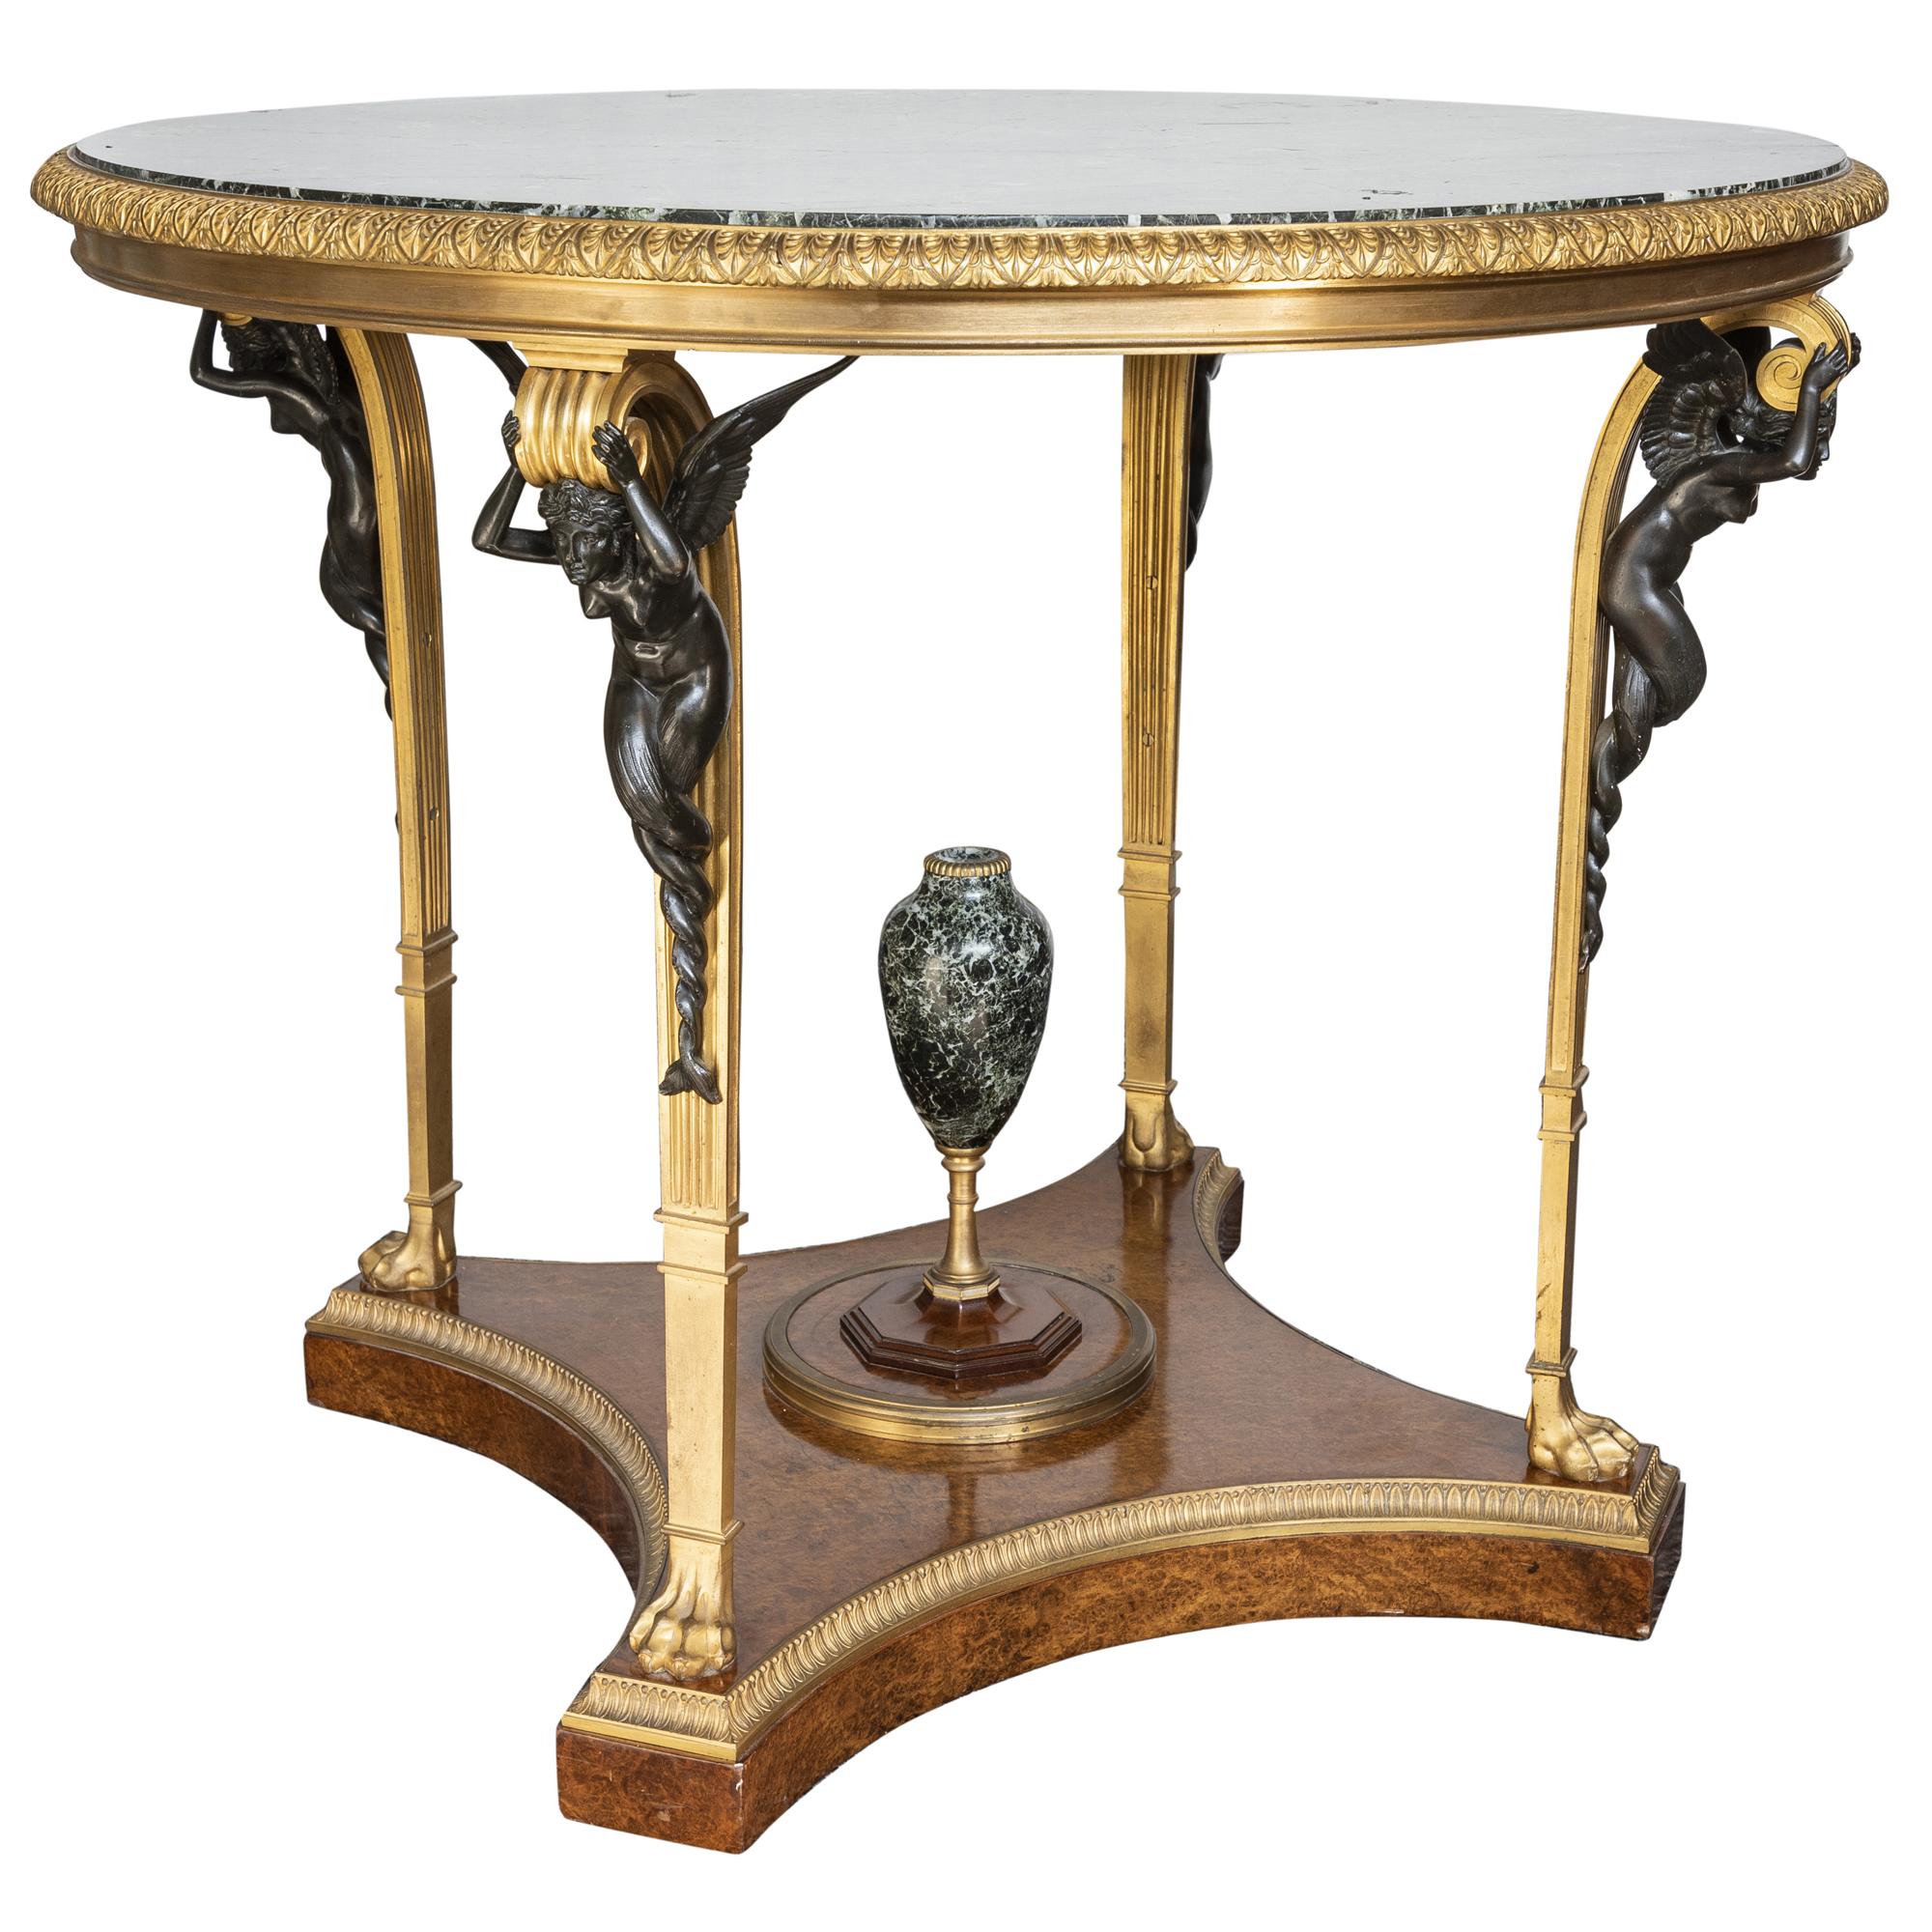 Louis XVI Style Ormolu and Patinated Bronze Mahogany and Amboyna Gueridon For Sale 1